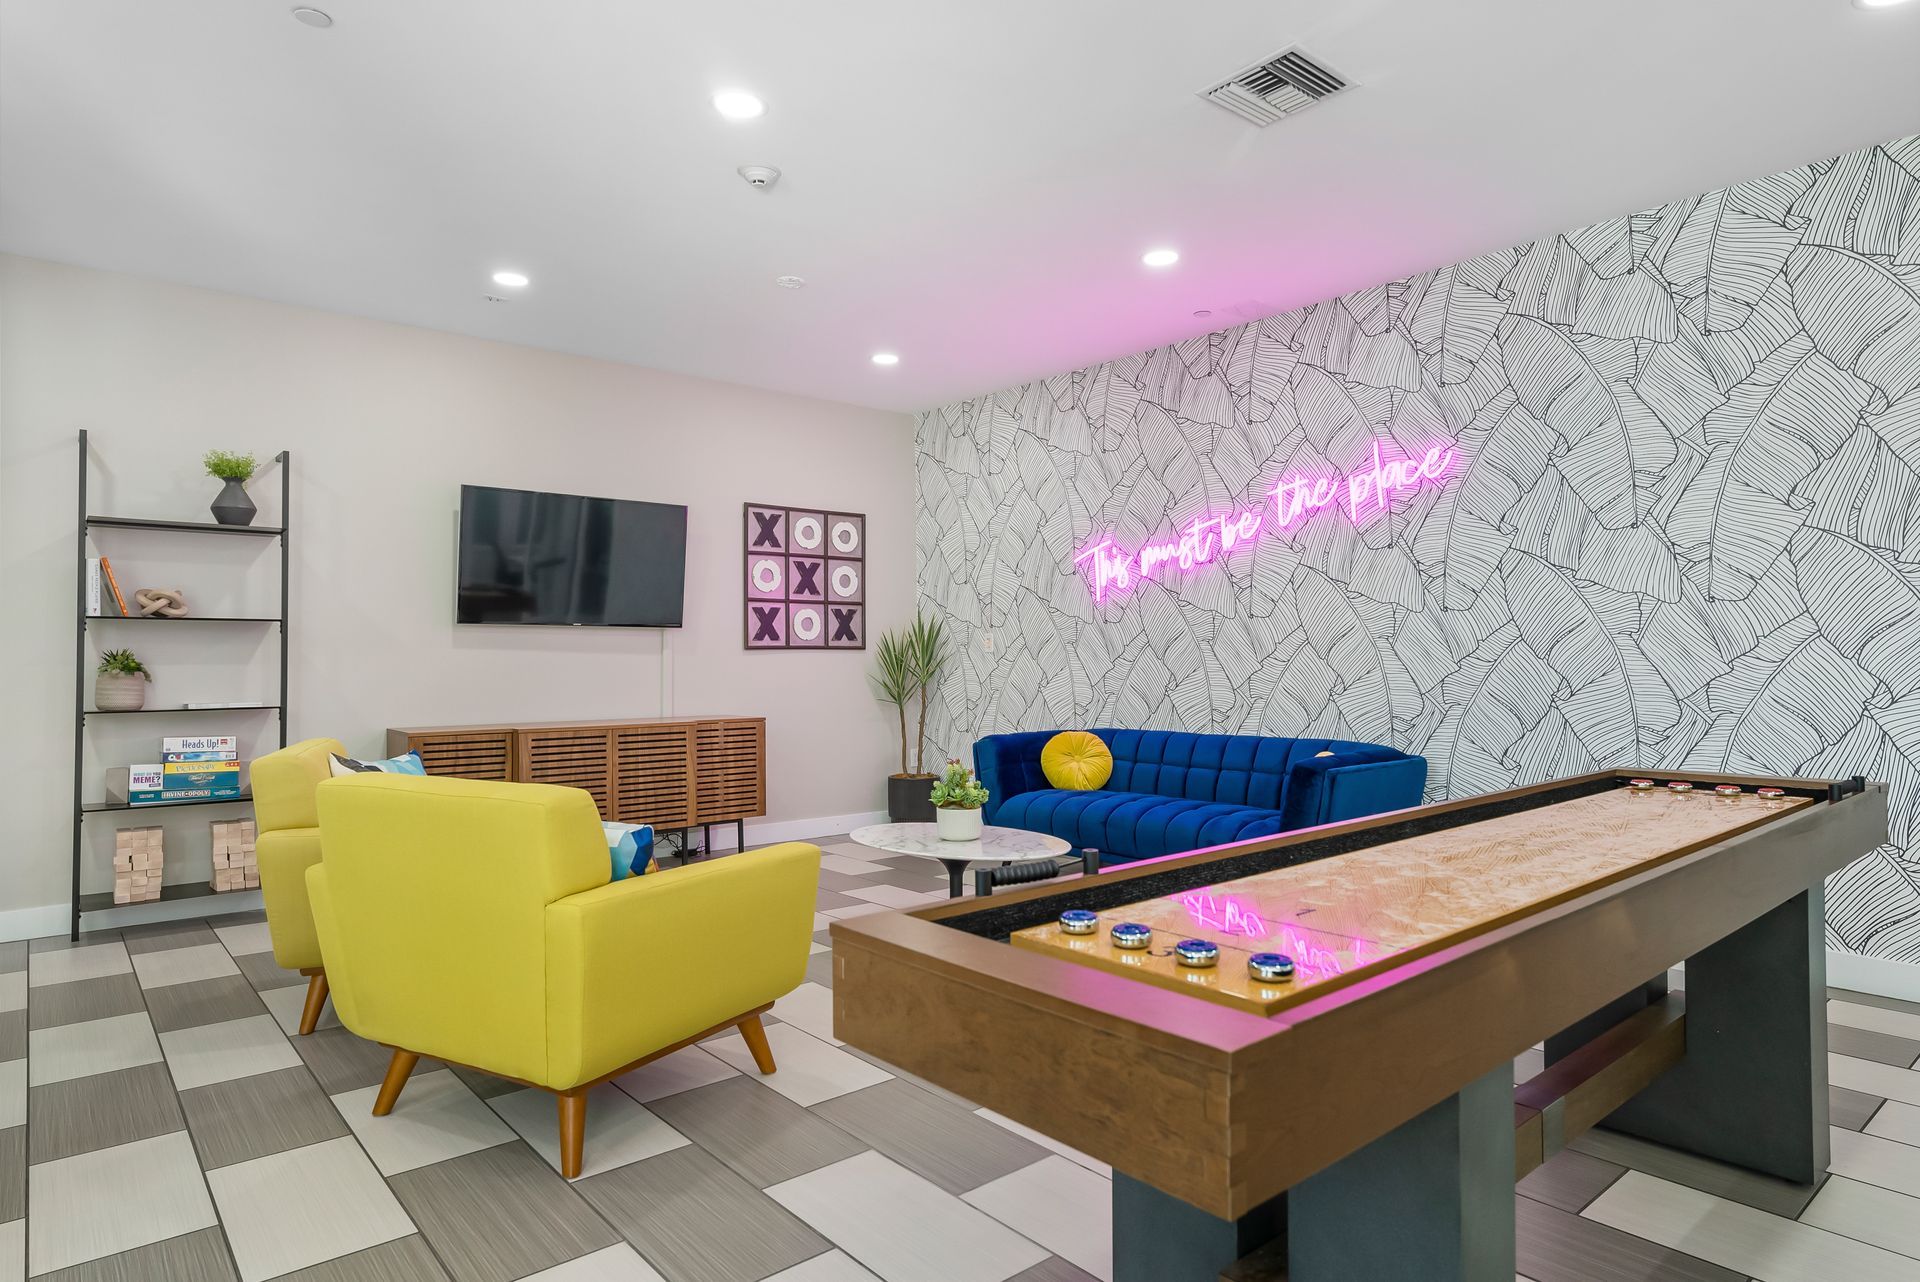 Community room with shuffle board and chairs